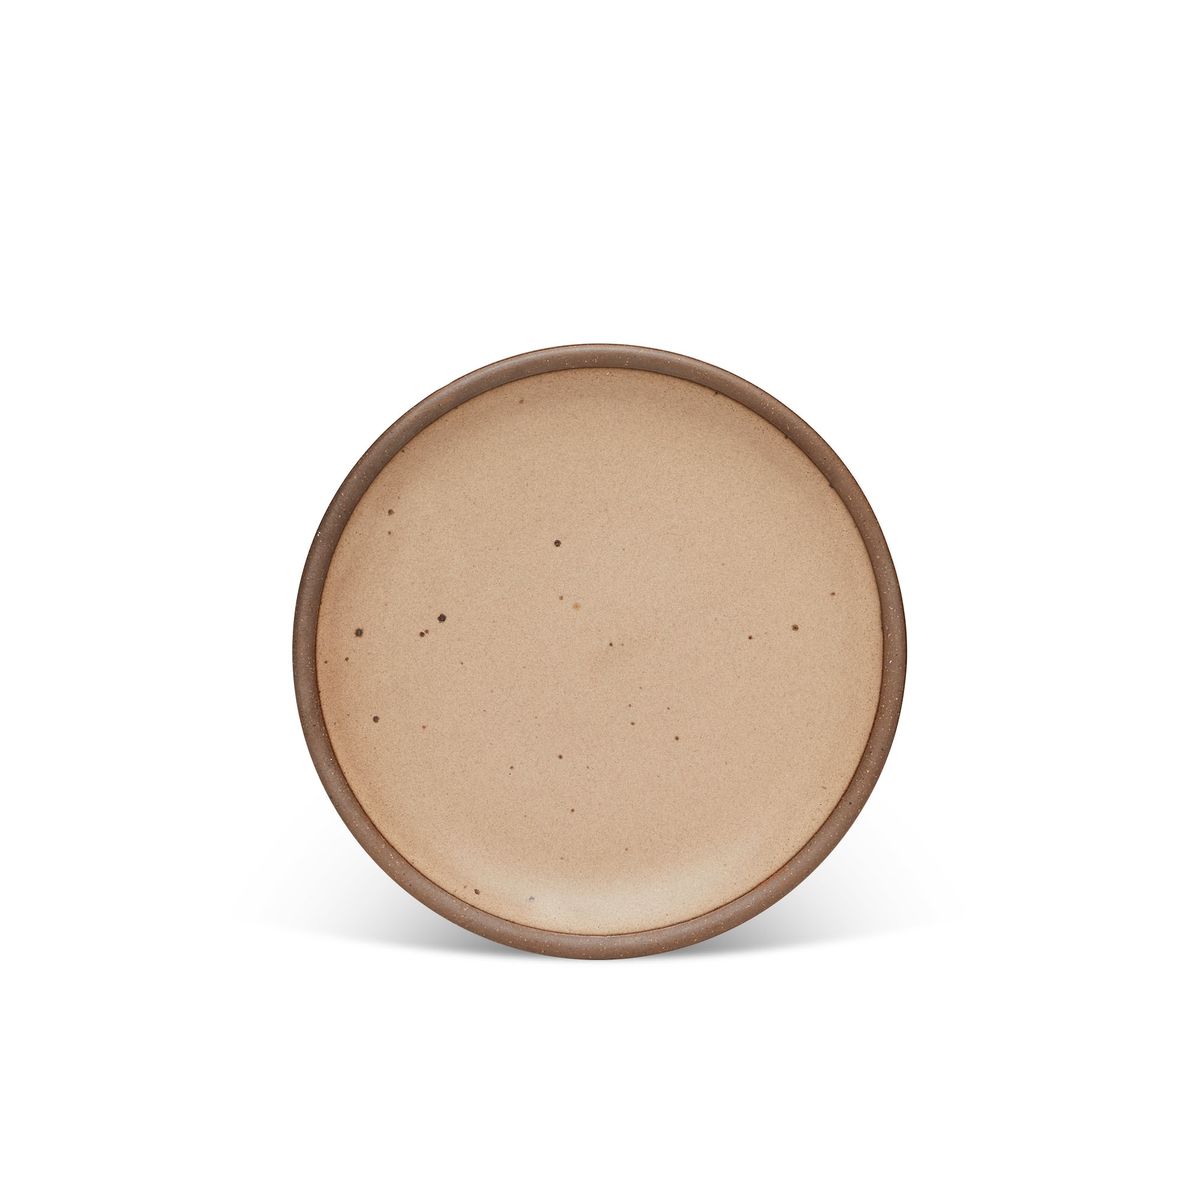 A medium sized ceramic plate in a warm pale brown color featuring iron speckles and an unglazed rim.